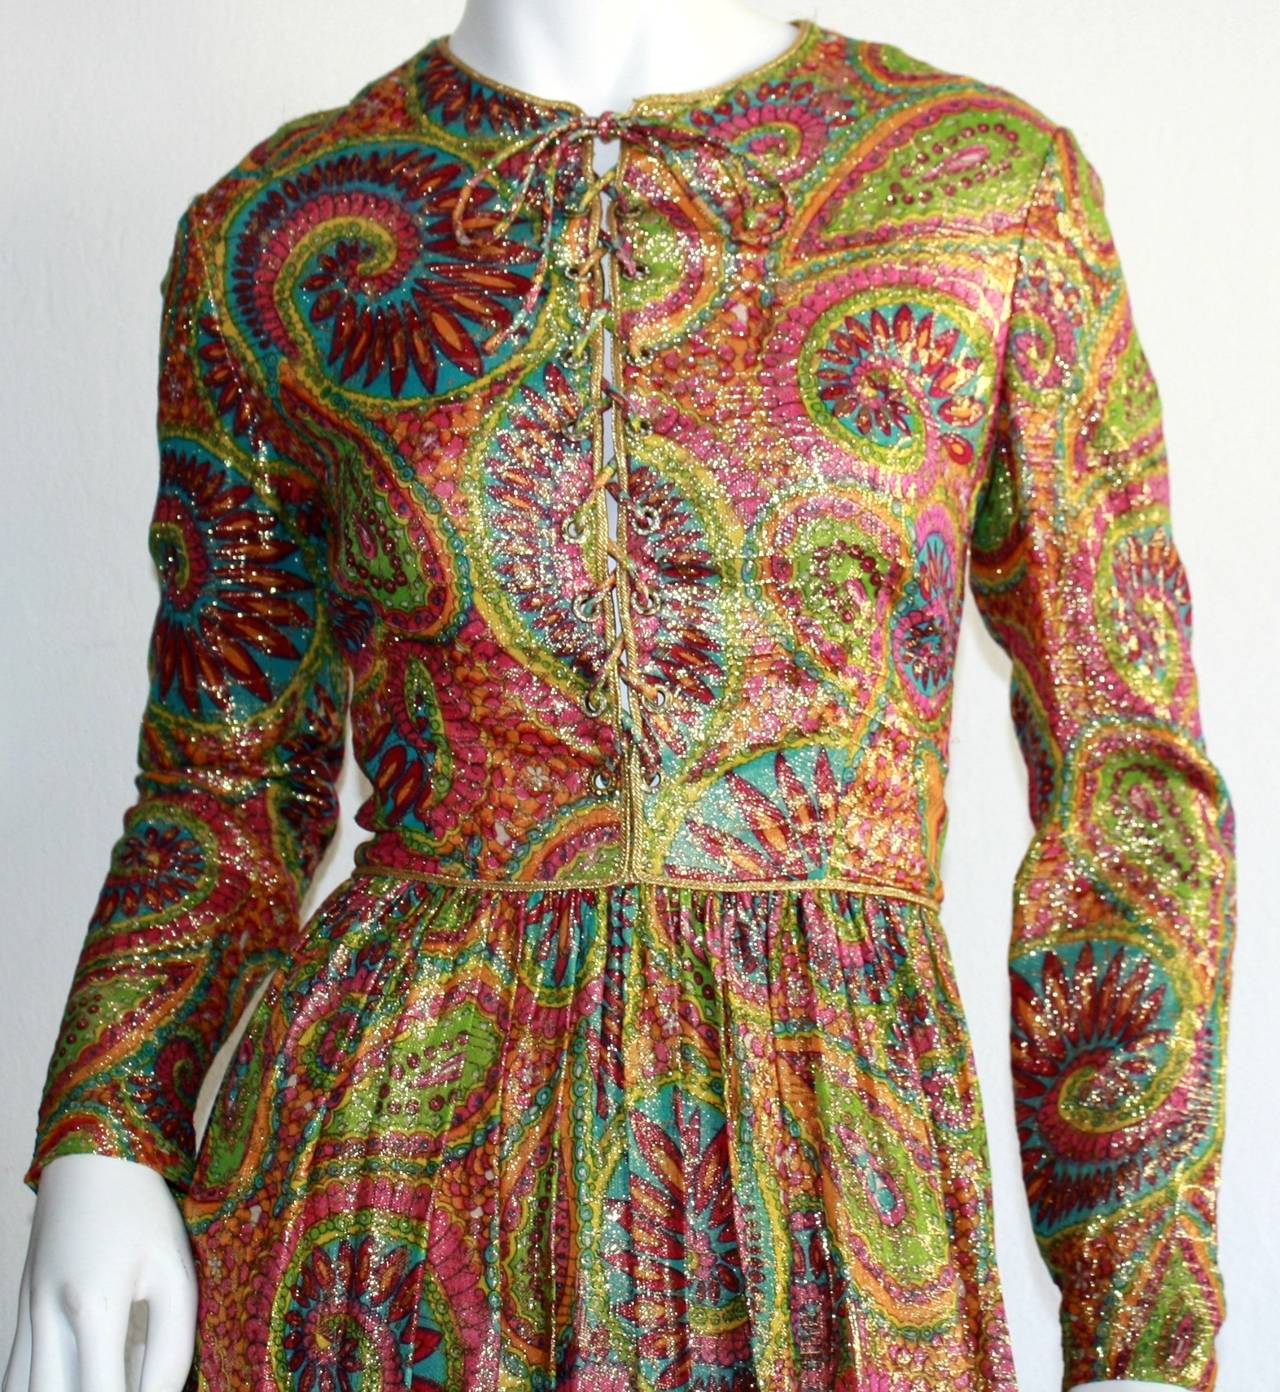 One of my favorite Mollie Parnis pieces ever! Chic paisley print throughout in vibrant colors (This metallic silk fabric is magnificent!) Features a tie up the bodice, with tiny rhinestones encrusted at each opening. A true gem! Fully lined. In